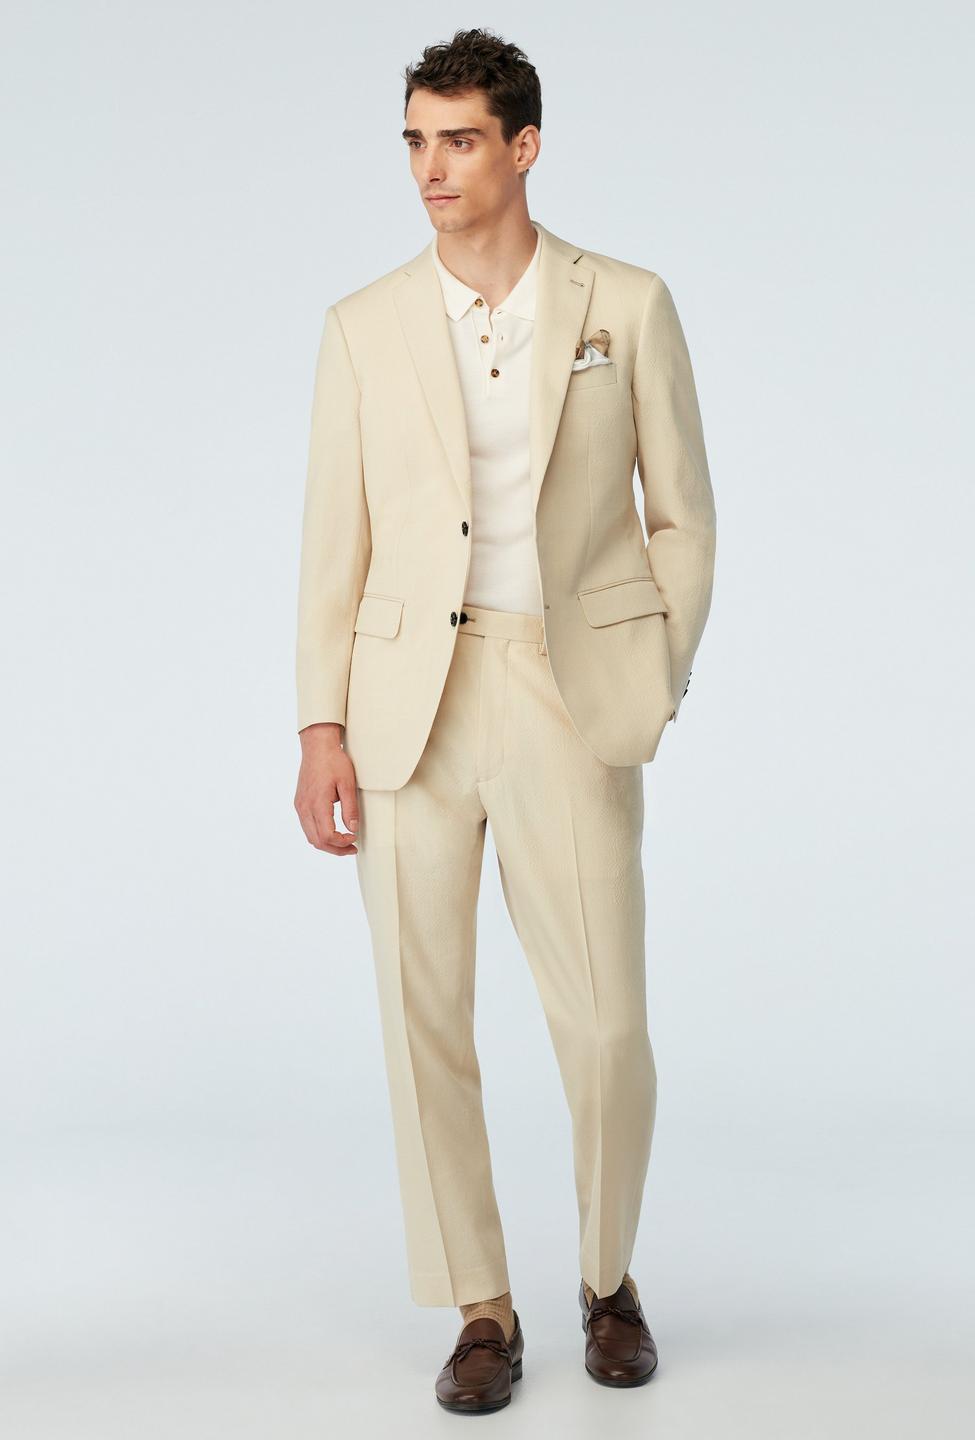 Cream suit - Stapleford Solid Design from Seasonal Indochino Collection